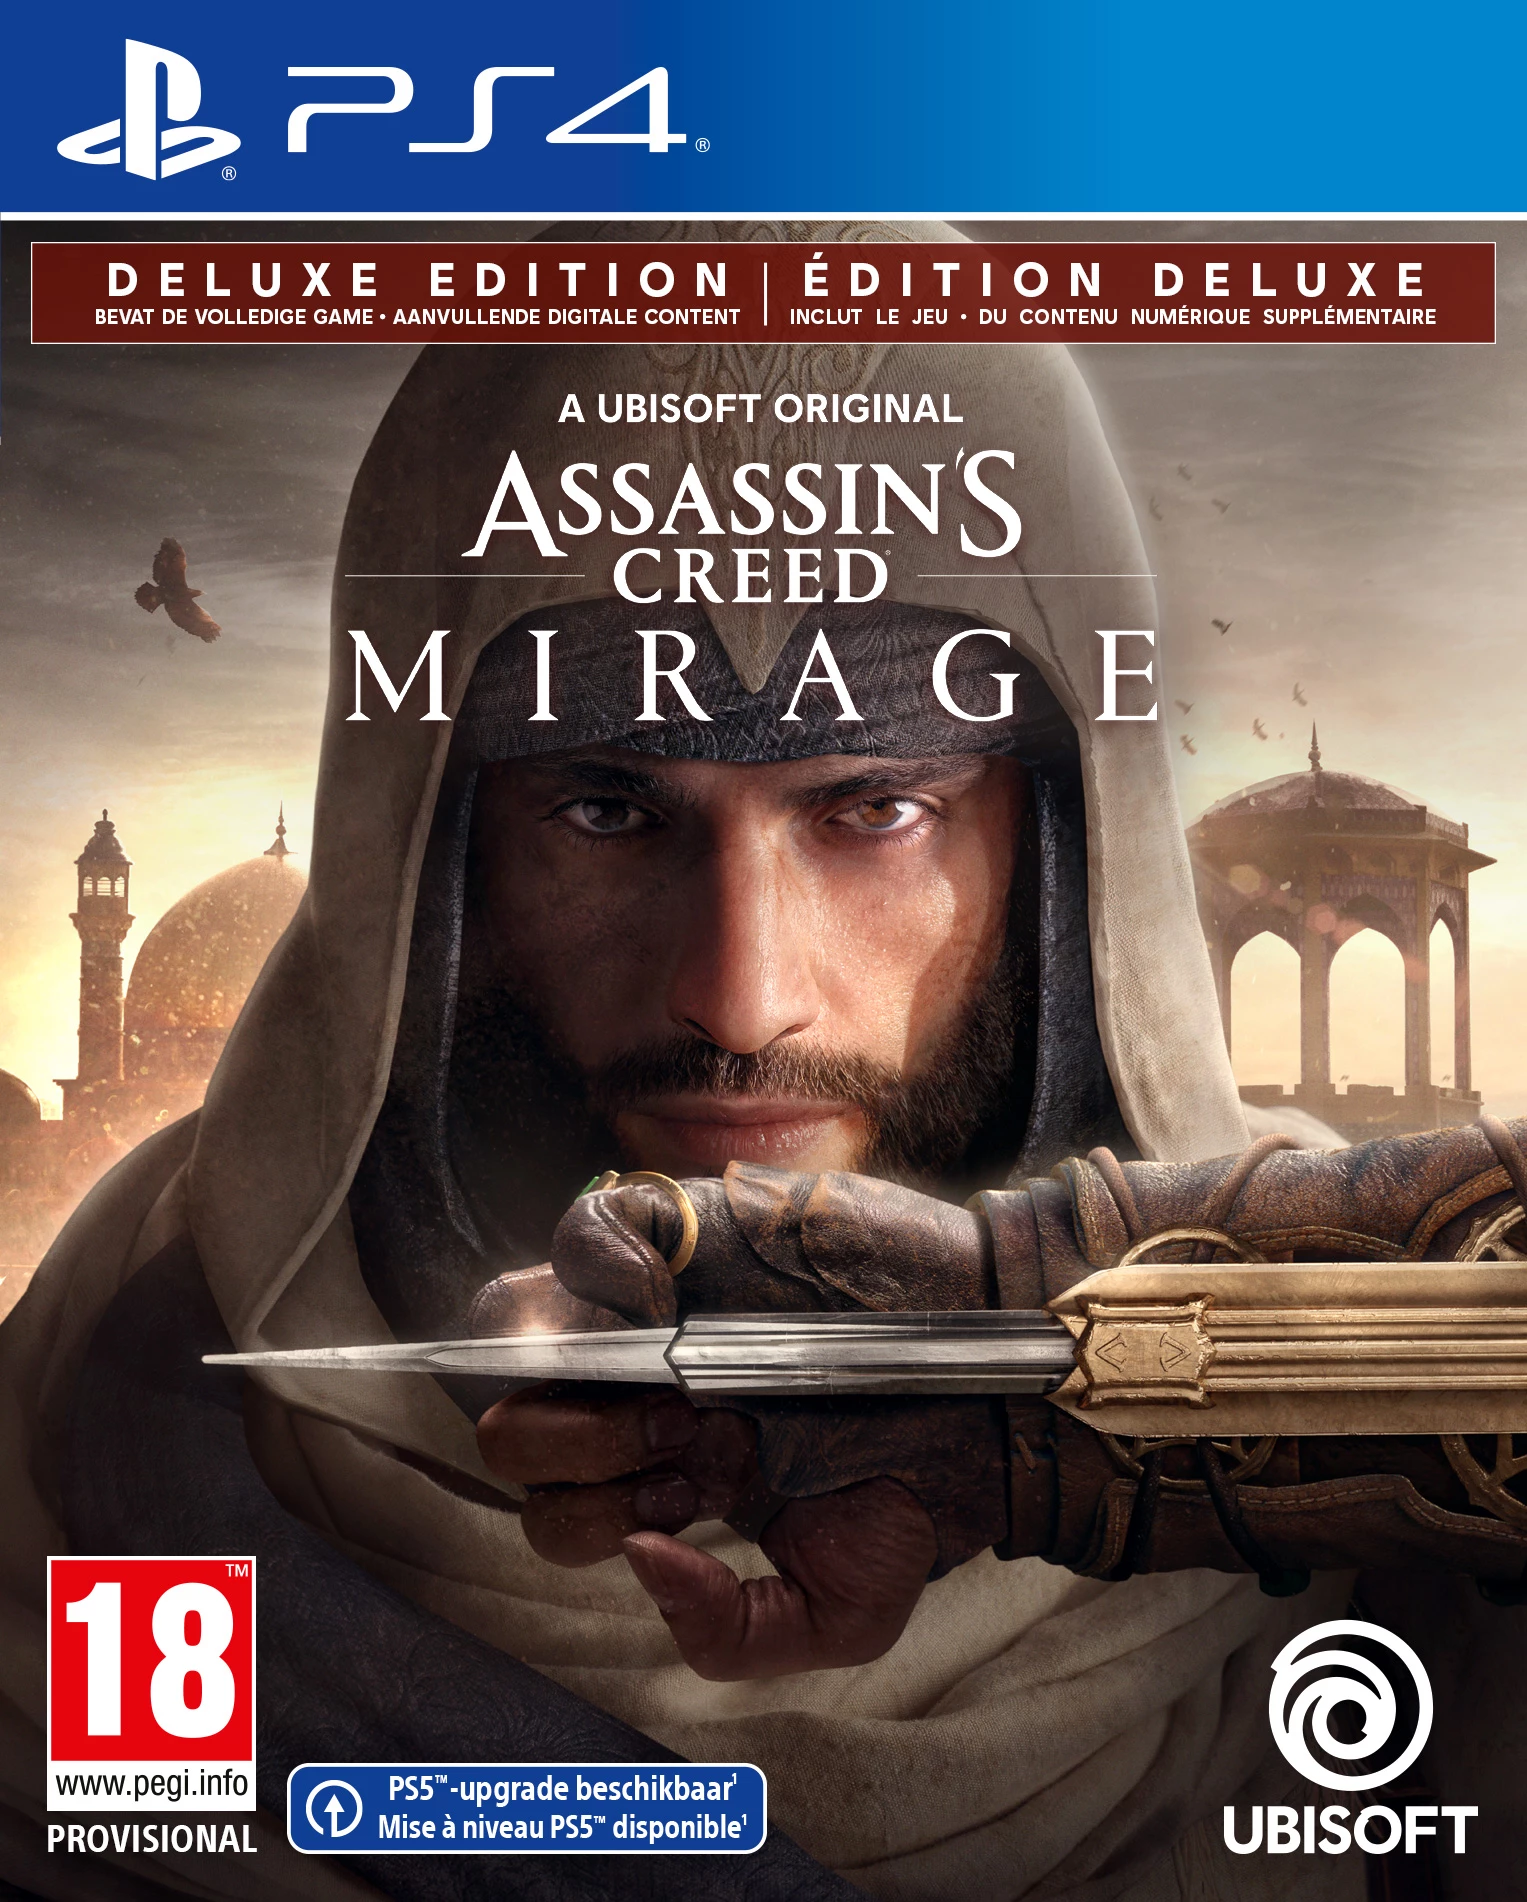 Assassins Creed: Mirage - Deluxe Edition